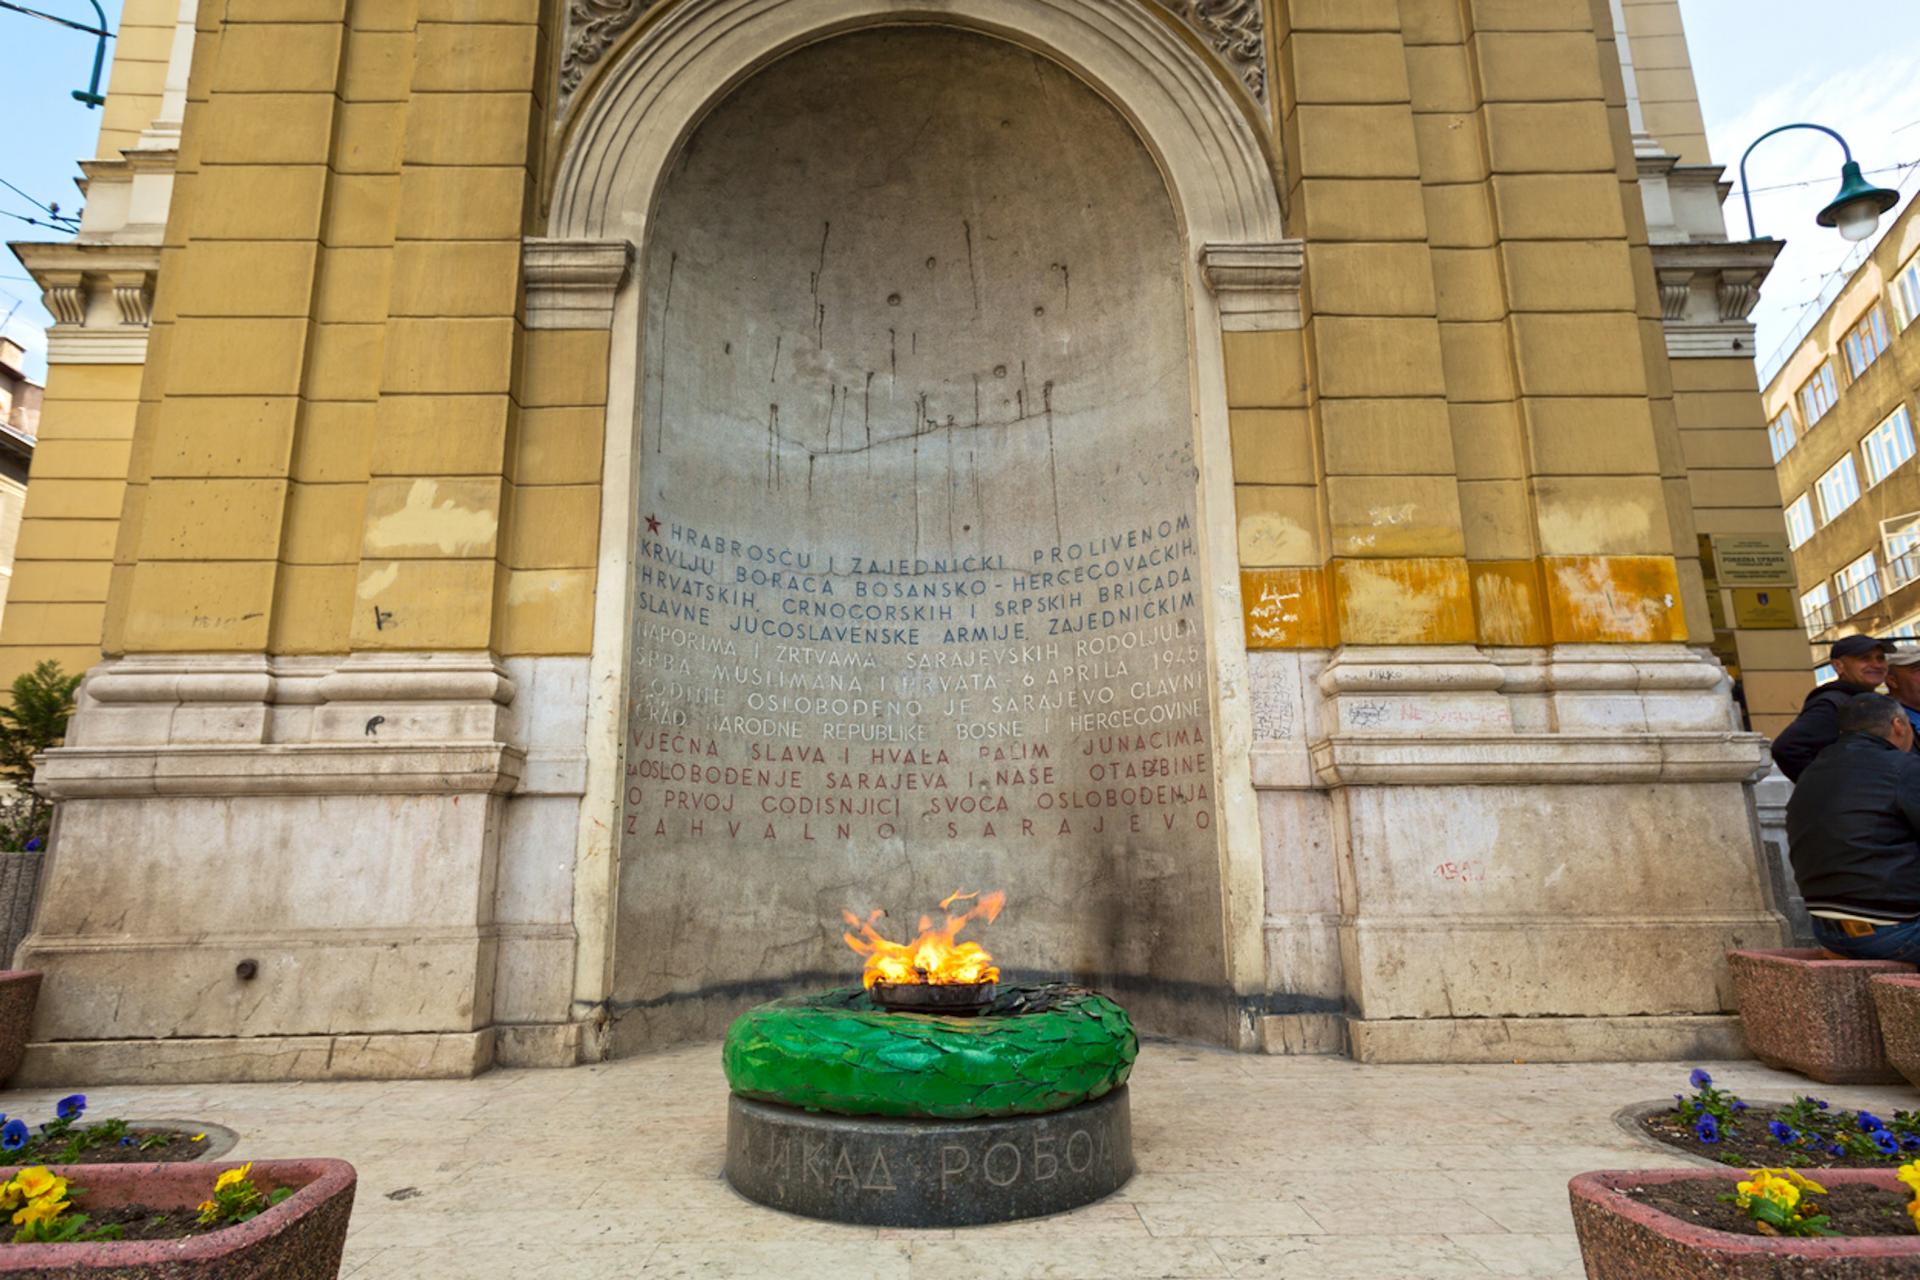 The Eternal Flame memorial designed by Juraj Neidhardt was unveiled on April 6, 1946, marking the first anniversary of Sarajevo's liberation from the occupation of Nazi Germany and the fascist Independent State of Croatia. It stands as a testament to the sacrifices made during the war and serves as a reminder of the city's resilience.